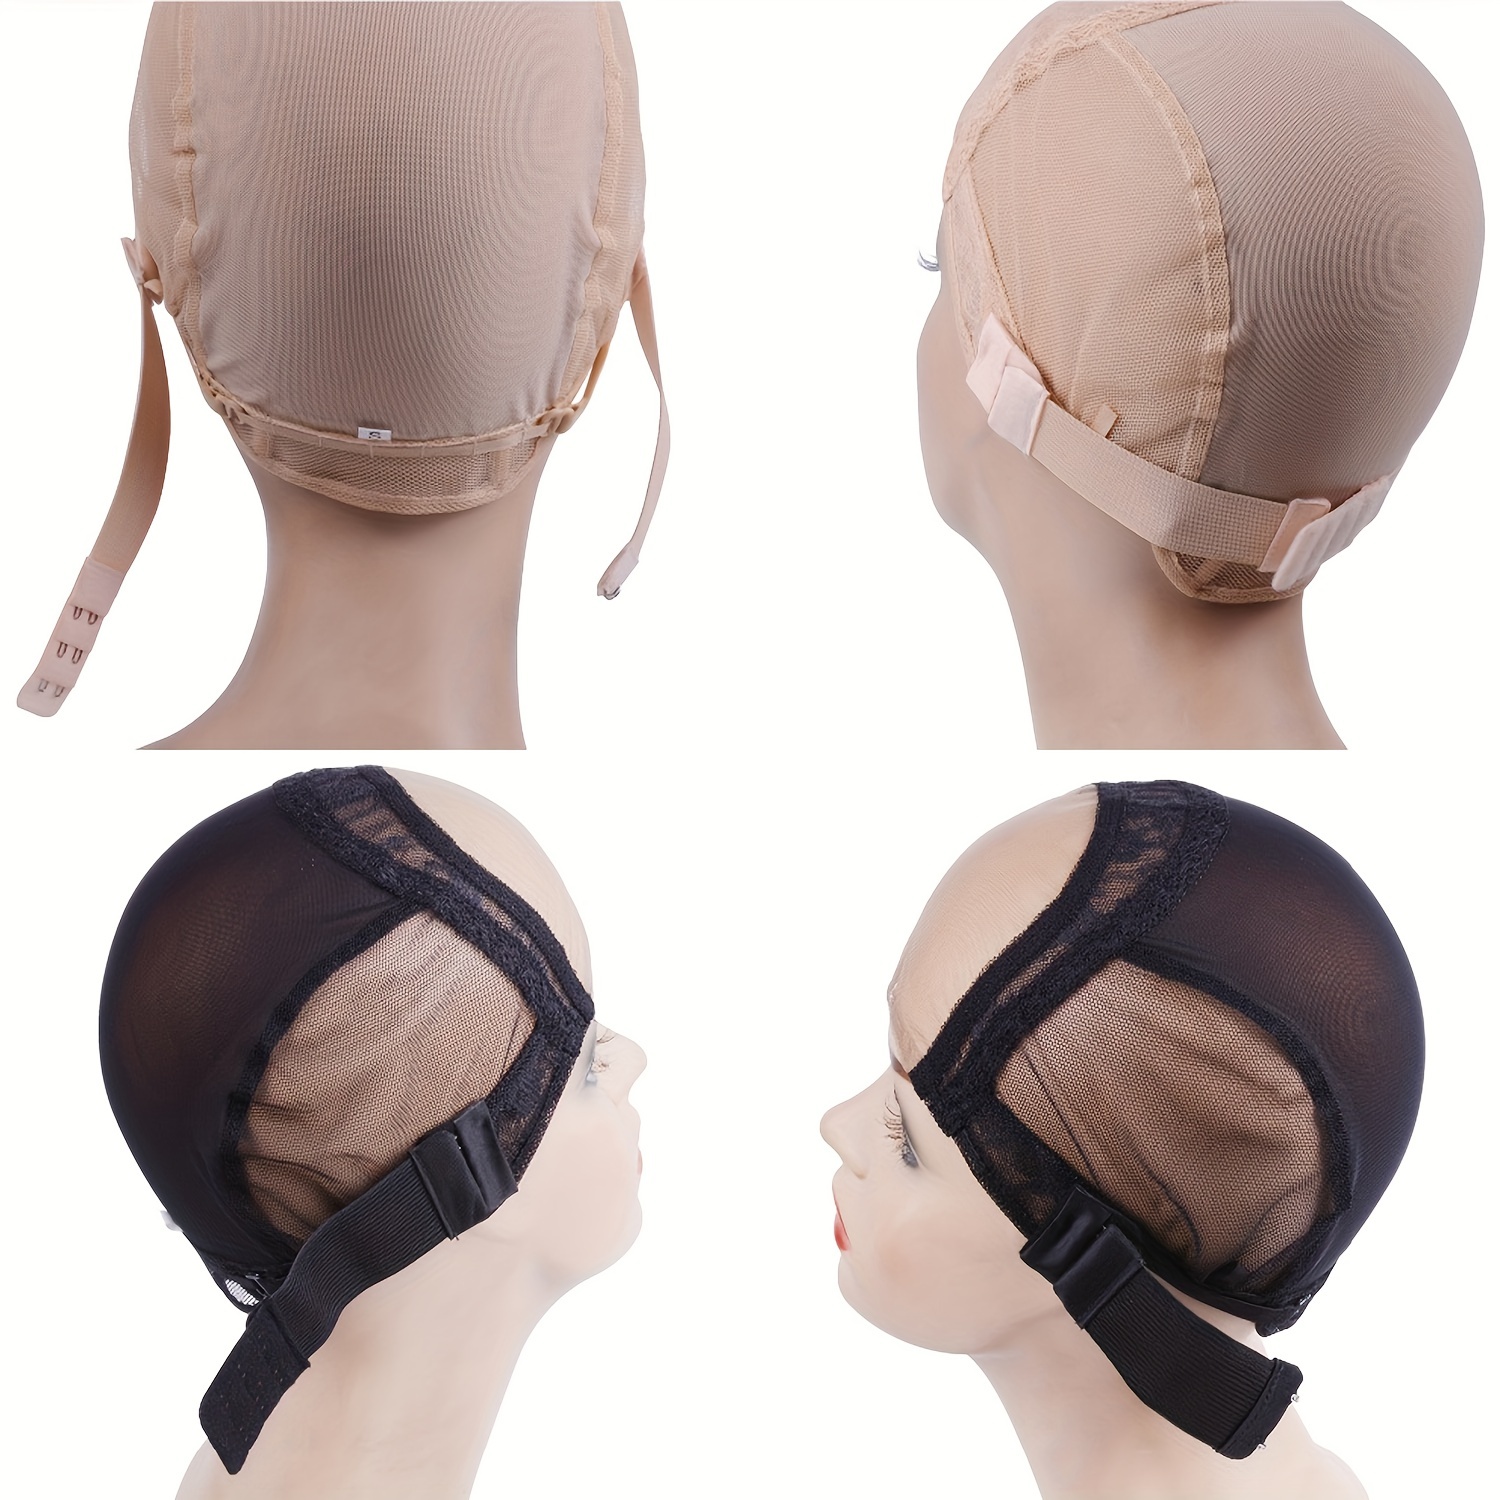 Glueless Wig Adjustable Strap With Hooks For Making Wig Cap Black